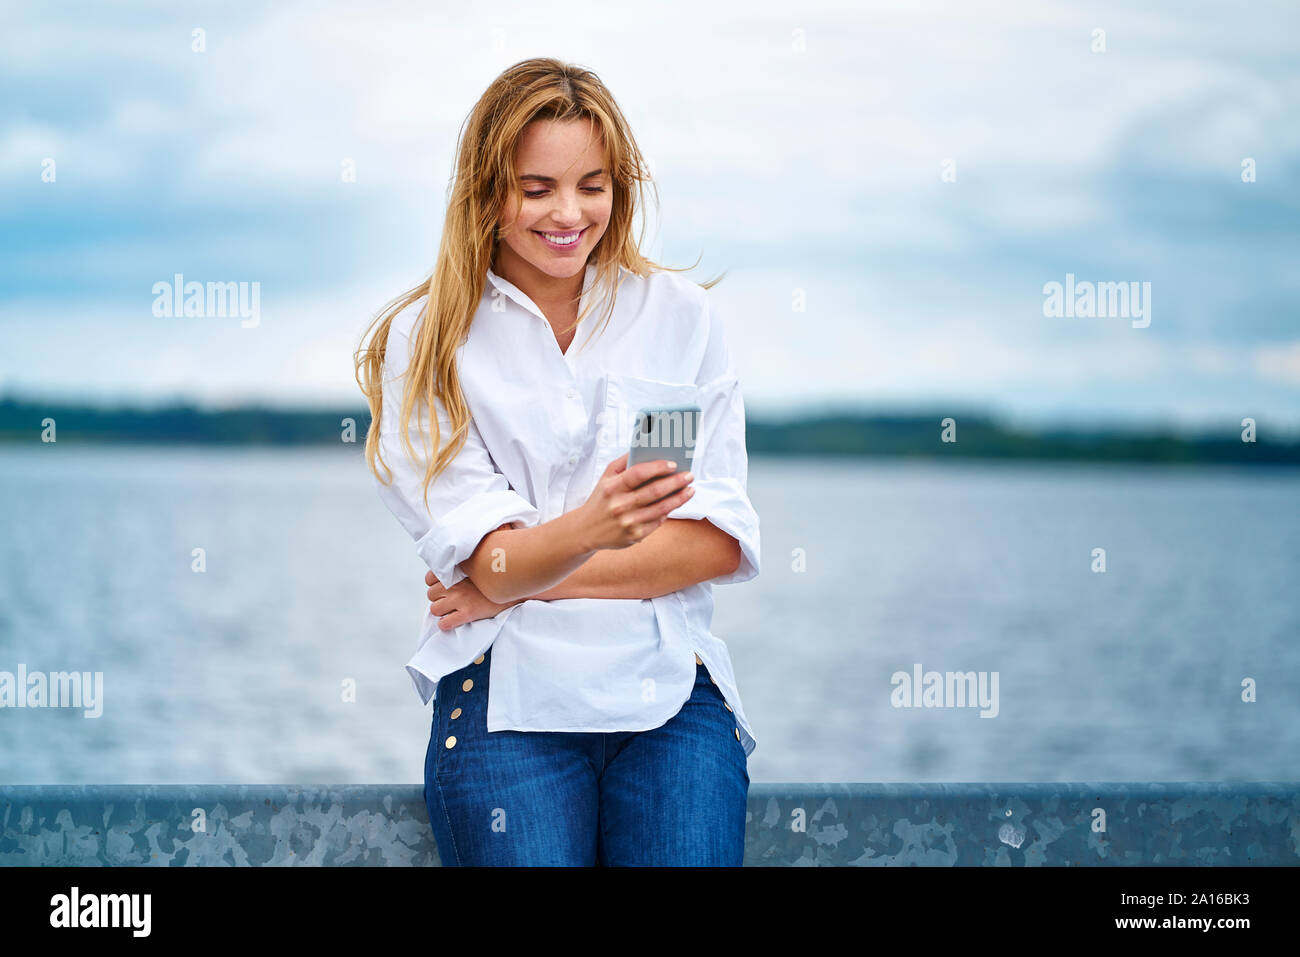 Happy woman checking cell phone at the lakeside Stock Photo